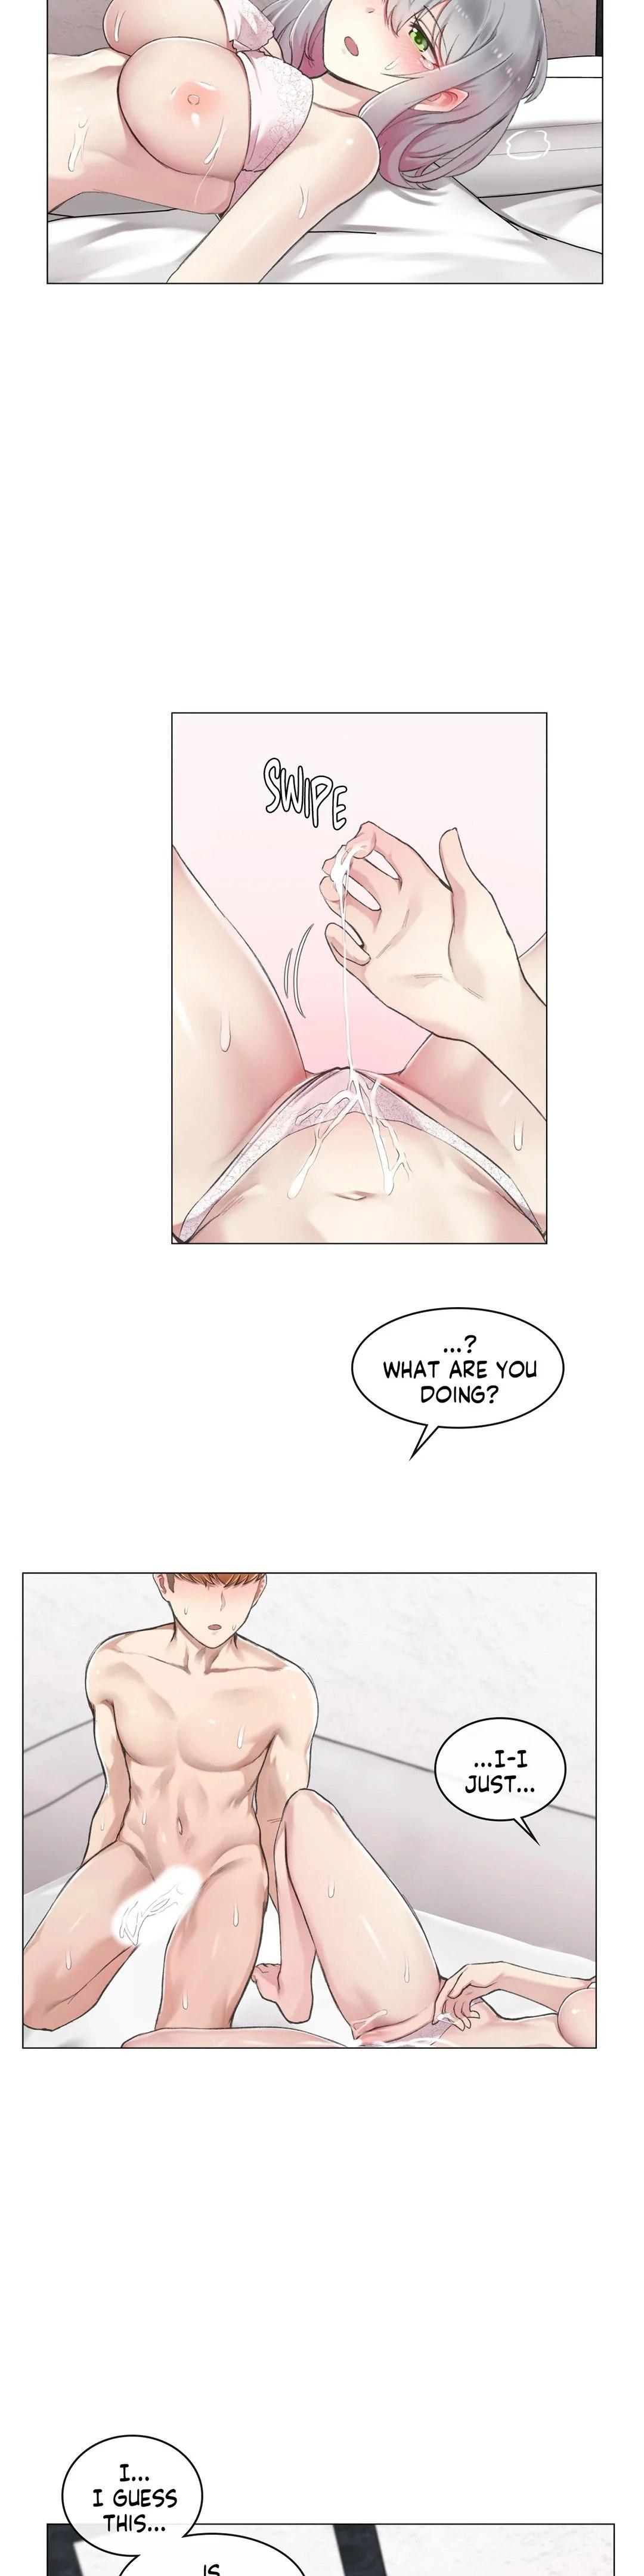 [Dumangoon, KONG_] Sexcape Room: Snap Off Ch.7/7 [English] [Manhwa PDF] Completed 126